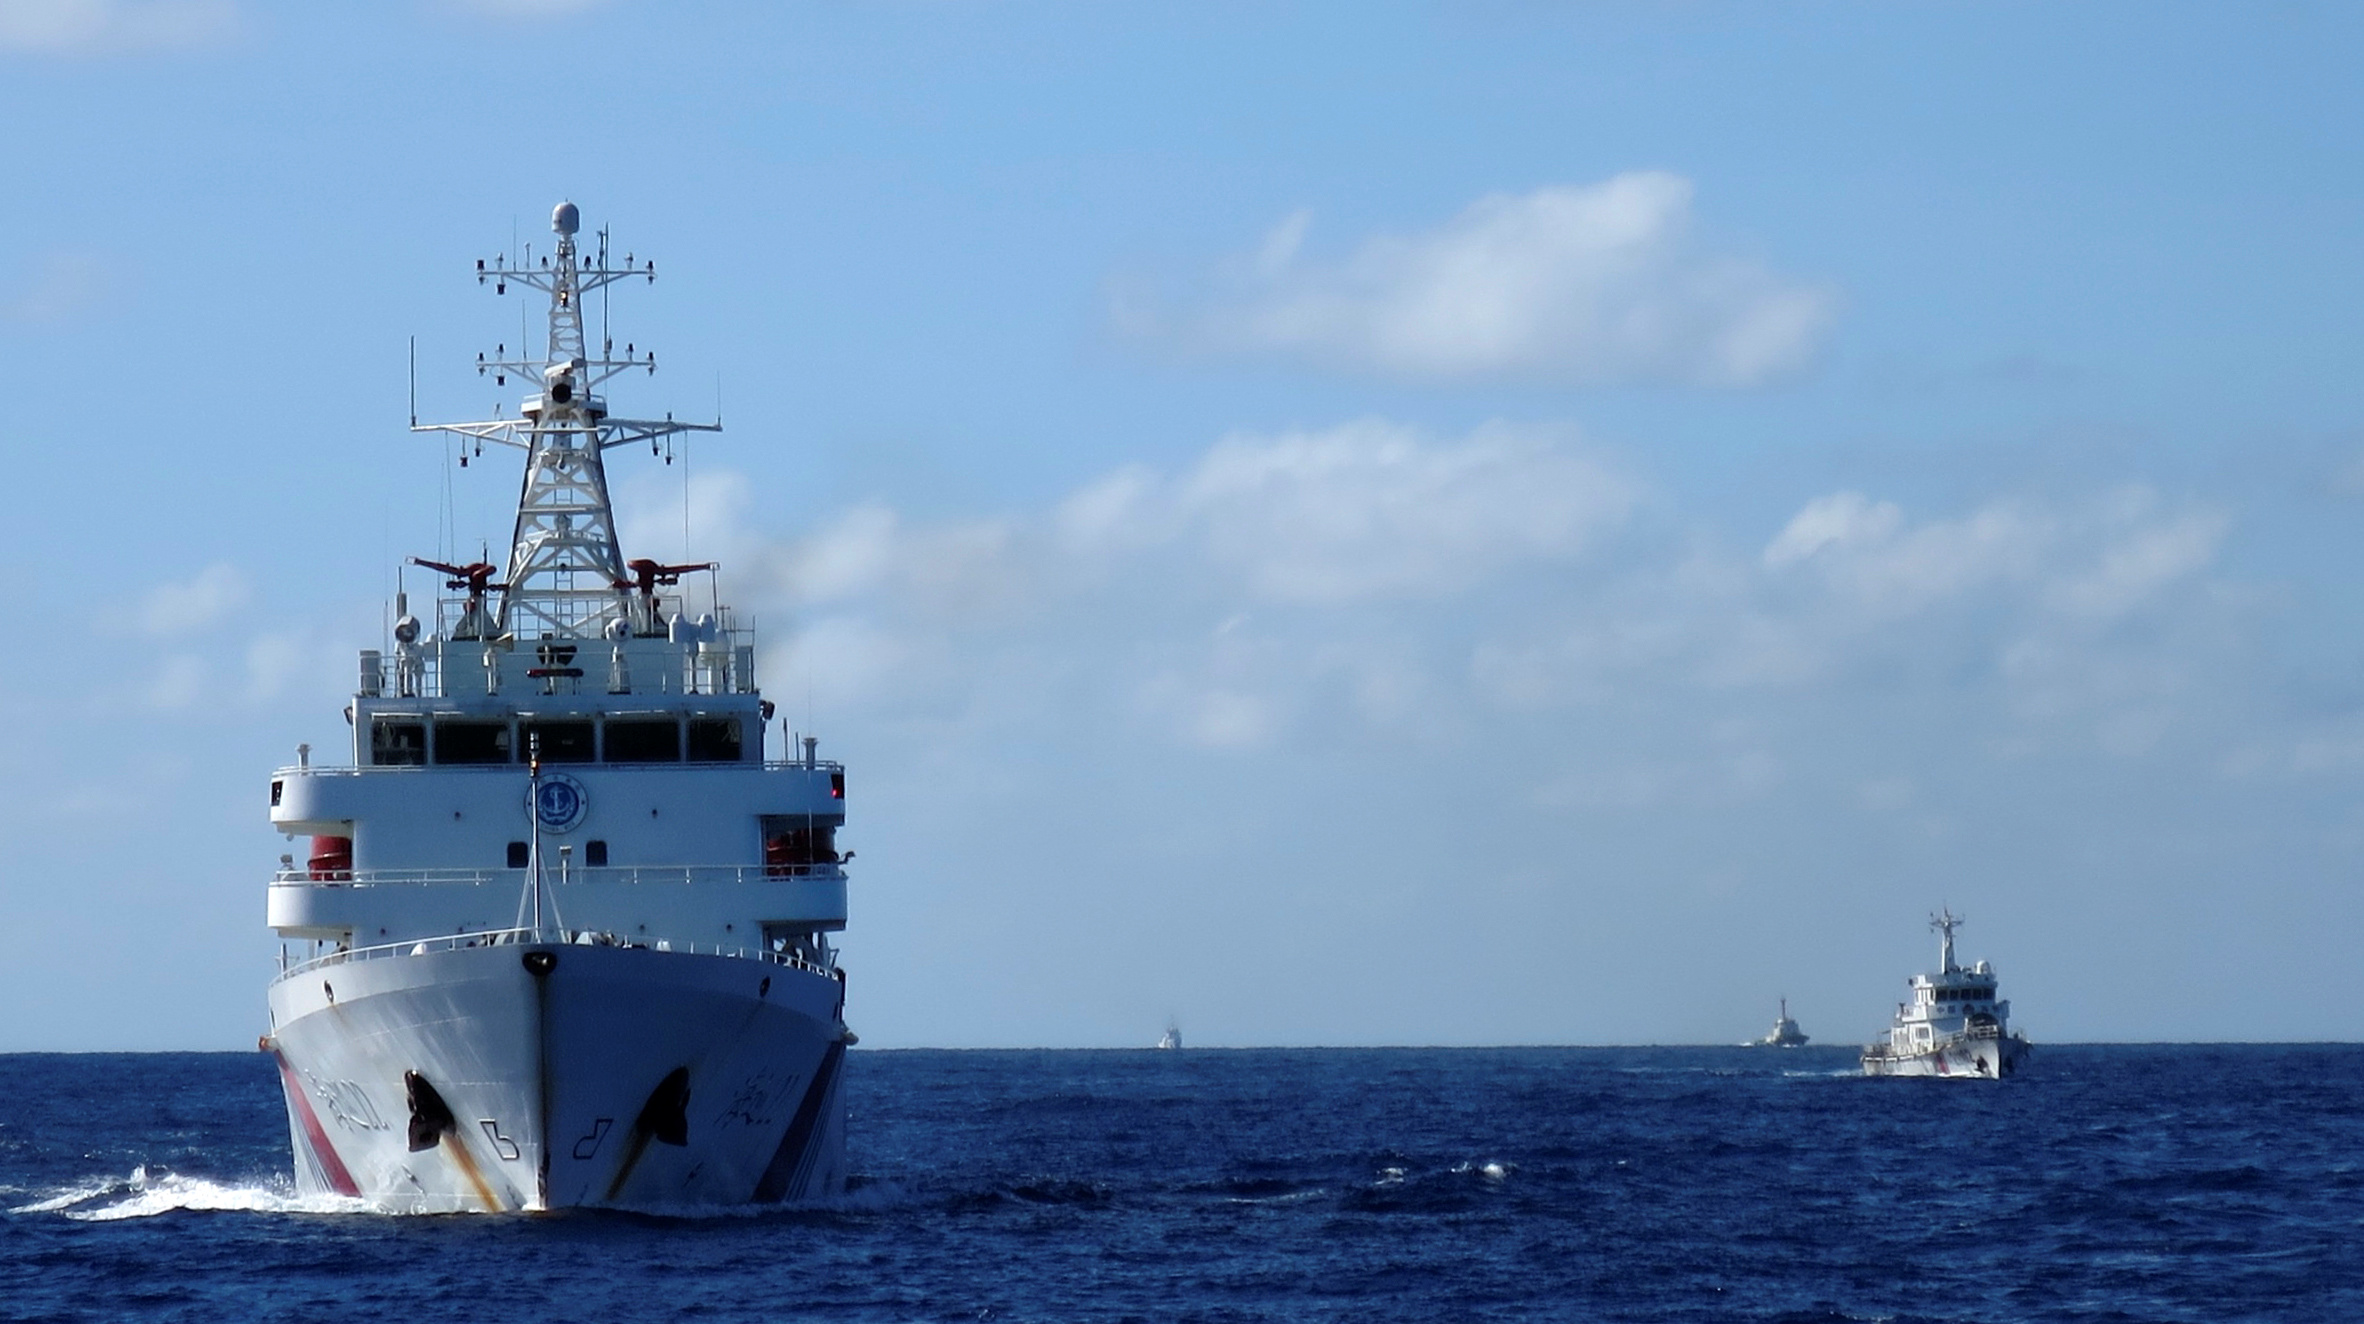 Chinese coastguard ships give chase to Vietnamese coastguard vessels after they came within 10 nautical miles Haiyang Shiyou 981 oil rig in the South China Sea